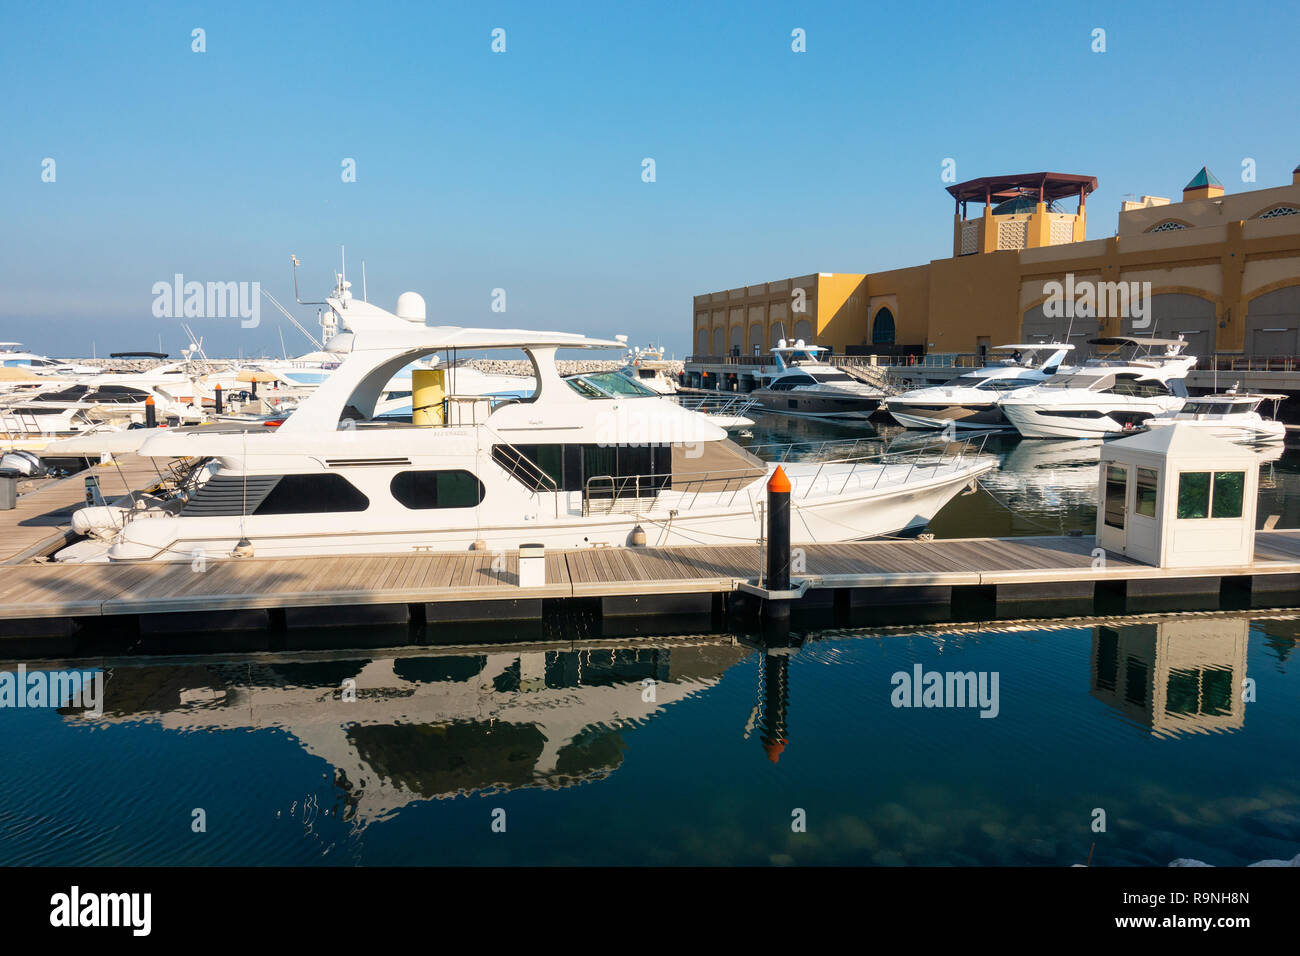 Marina at Al Out in Fahaheel in Kuwait, Middle East Stock Photo